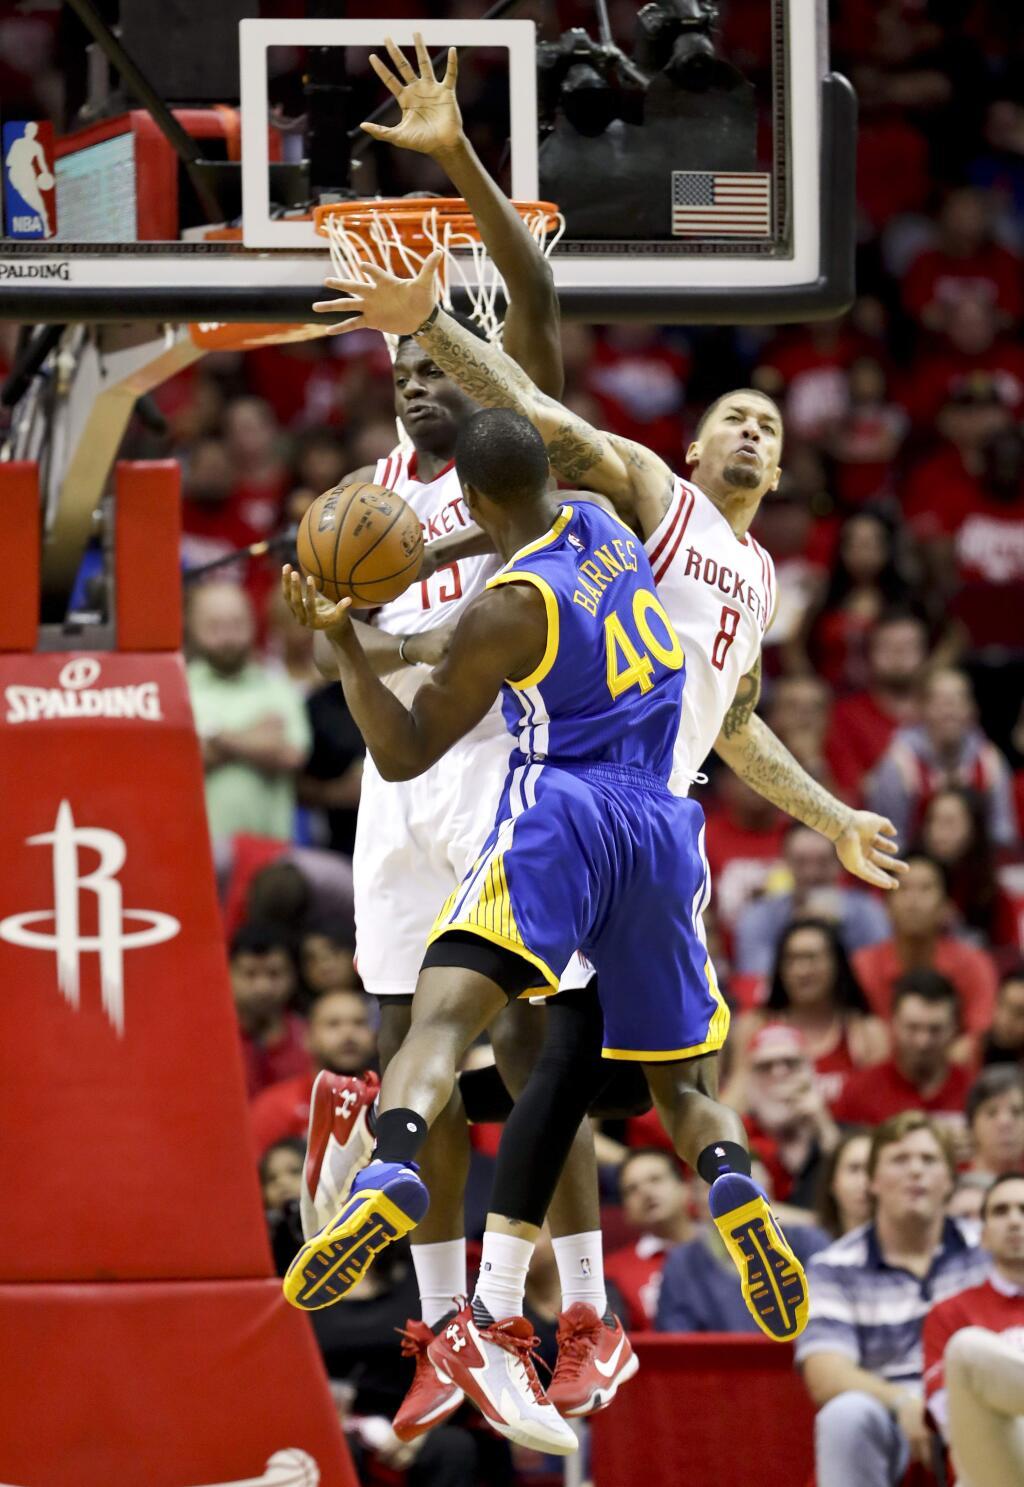 Golden State Warriors forward Harrison Barnes, middle, shoots between Houston Rockets forward Clint Capela, left, and forward Michael Beasley during the second half of Game 3 of a first-round playoff series, Thursday, April 21, 2016, in Houston. (AP Photo/David J. Phillip)